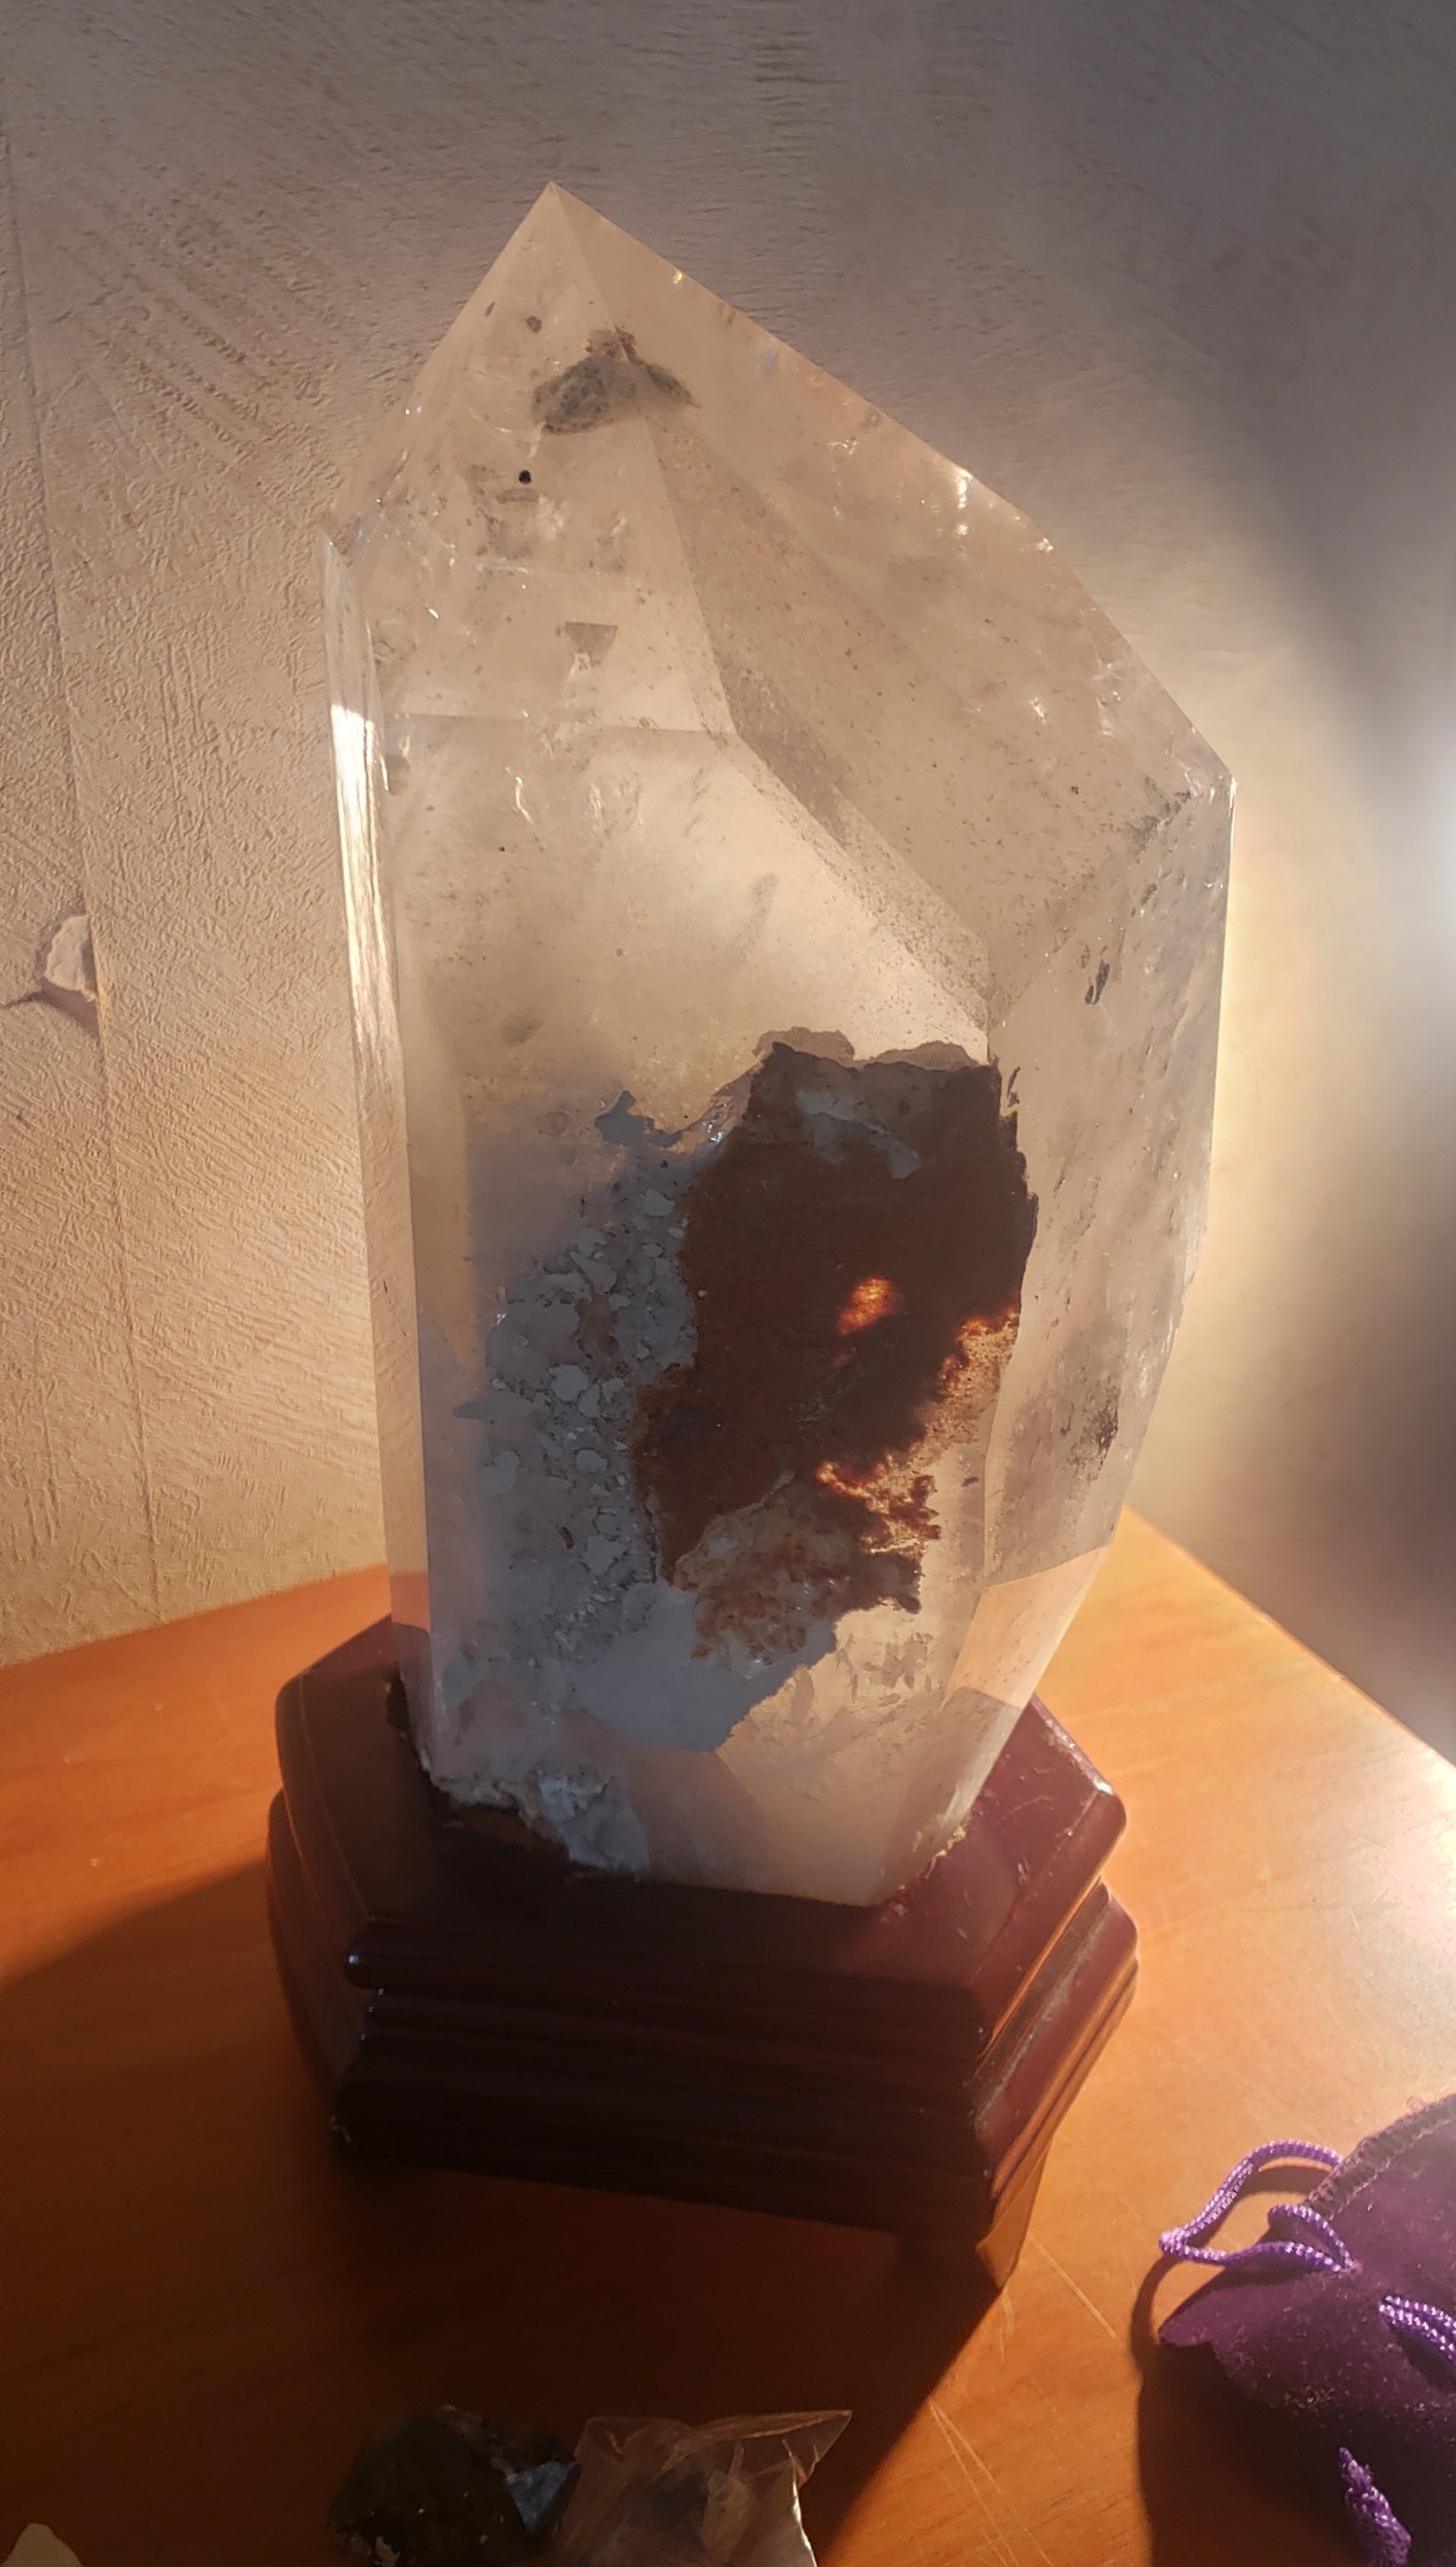 Large polished quartz with heaps phantoms and inclusions - 3.6kg